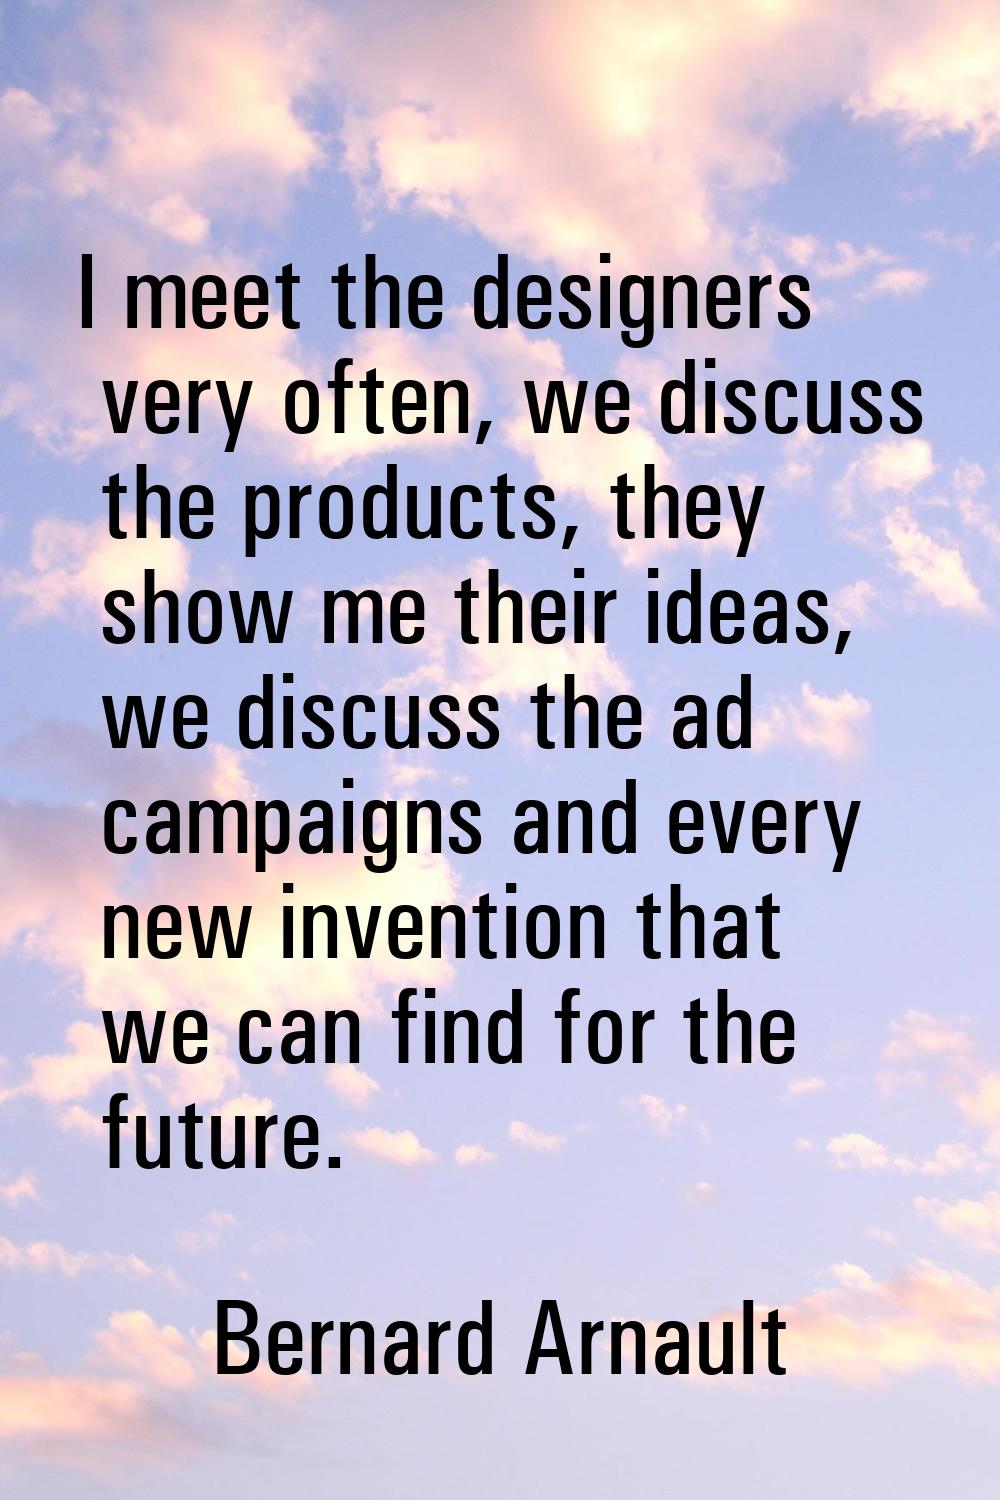 I meet the designers very often, we discuss the products, they show me their ideas, we discuss the 